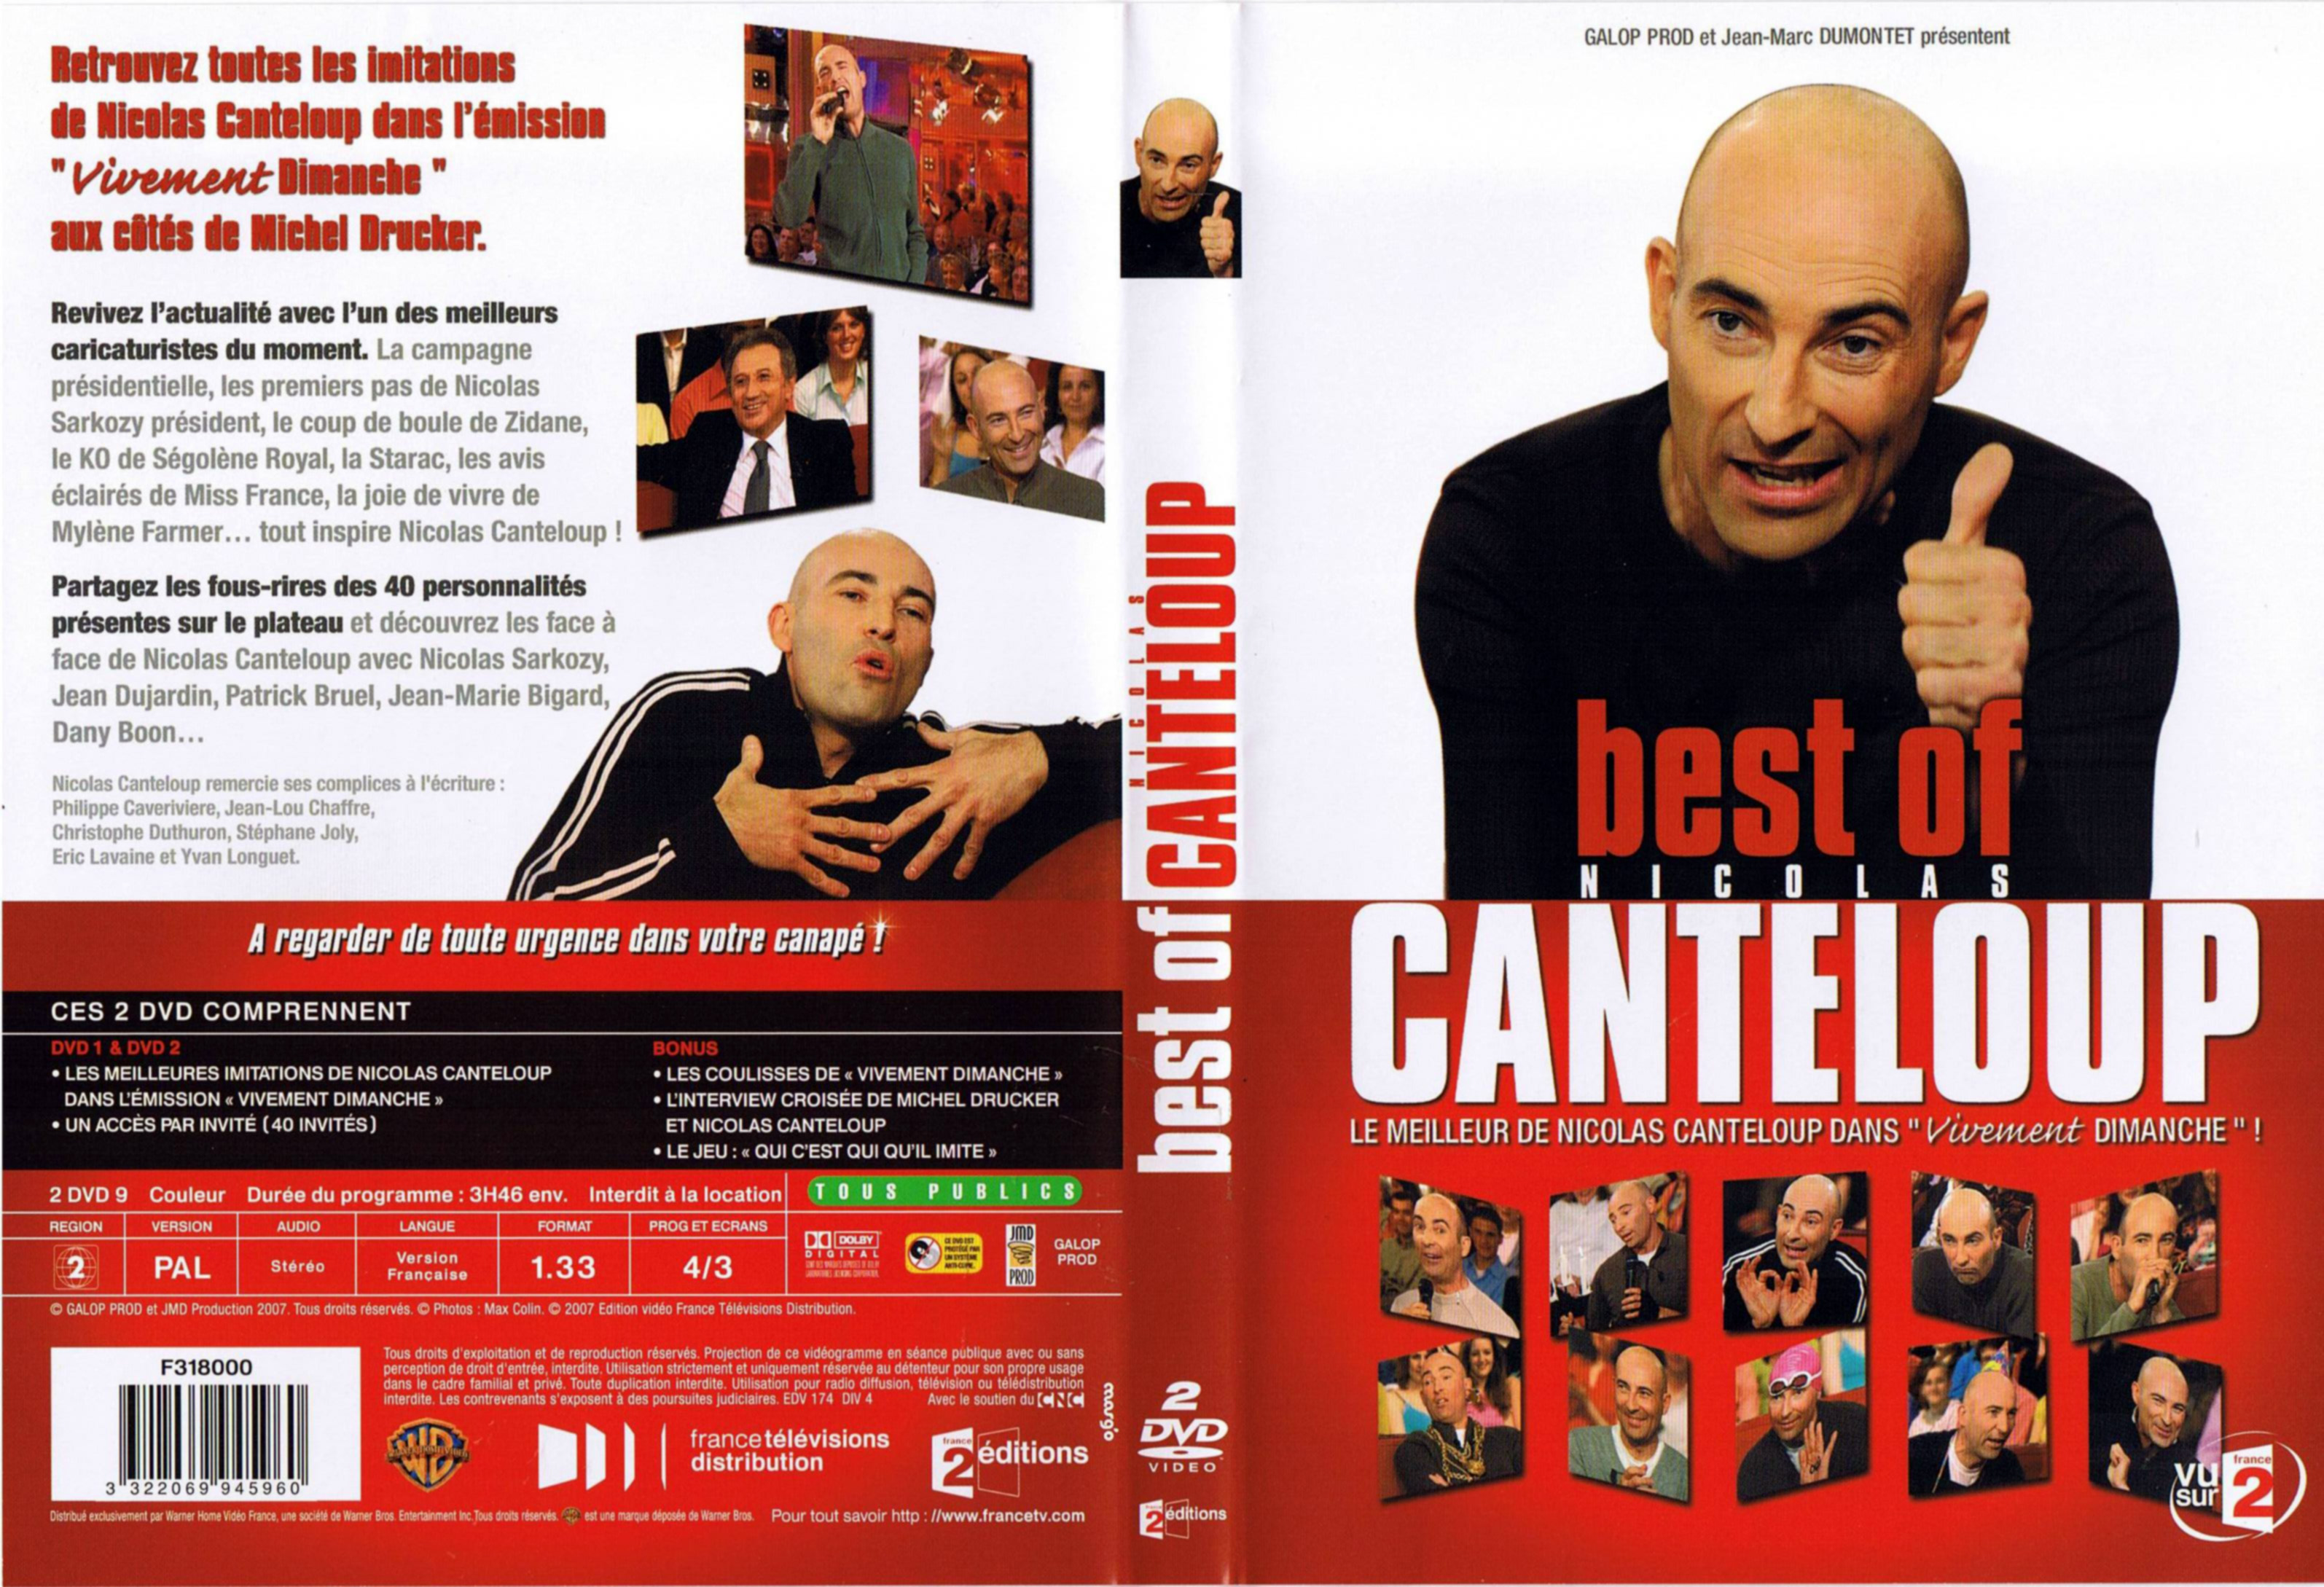 Jaquette DVD Nicolas canteloup best of